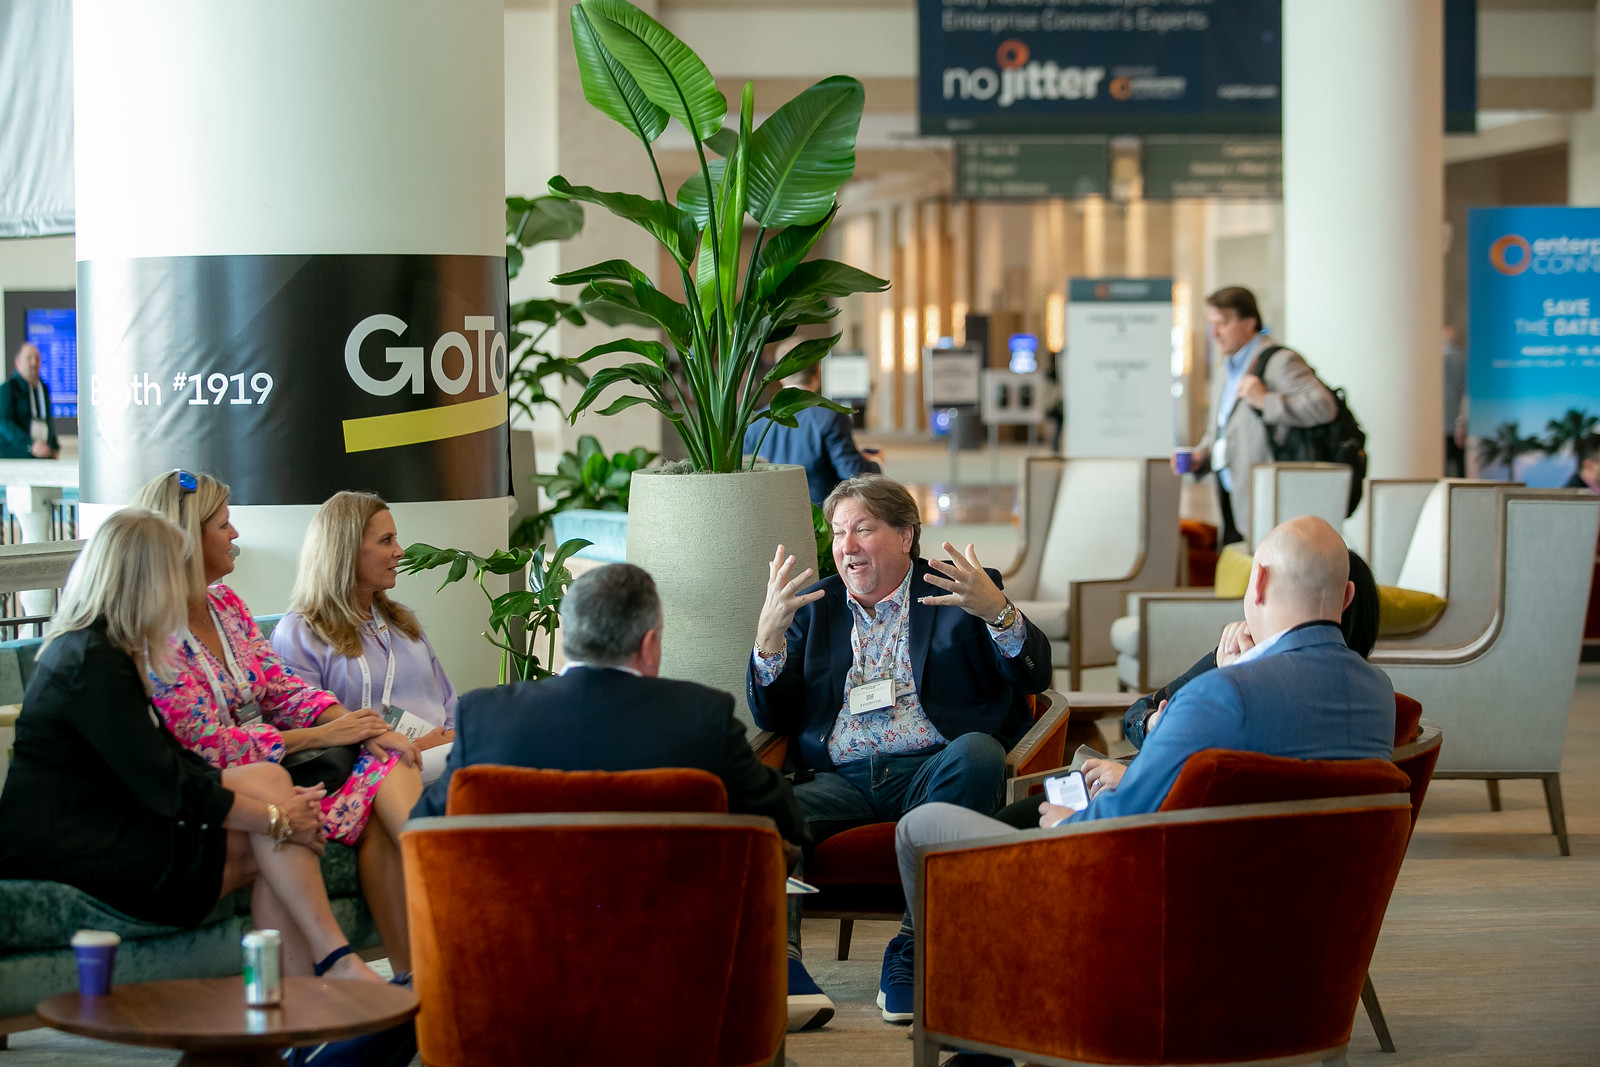 4 seated conference attendees in a networking lounge speaking with each other